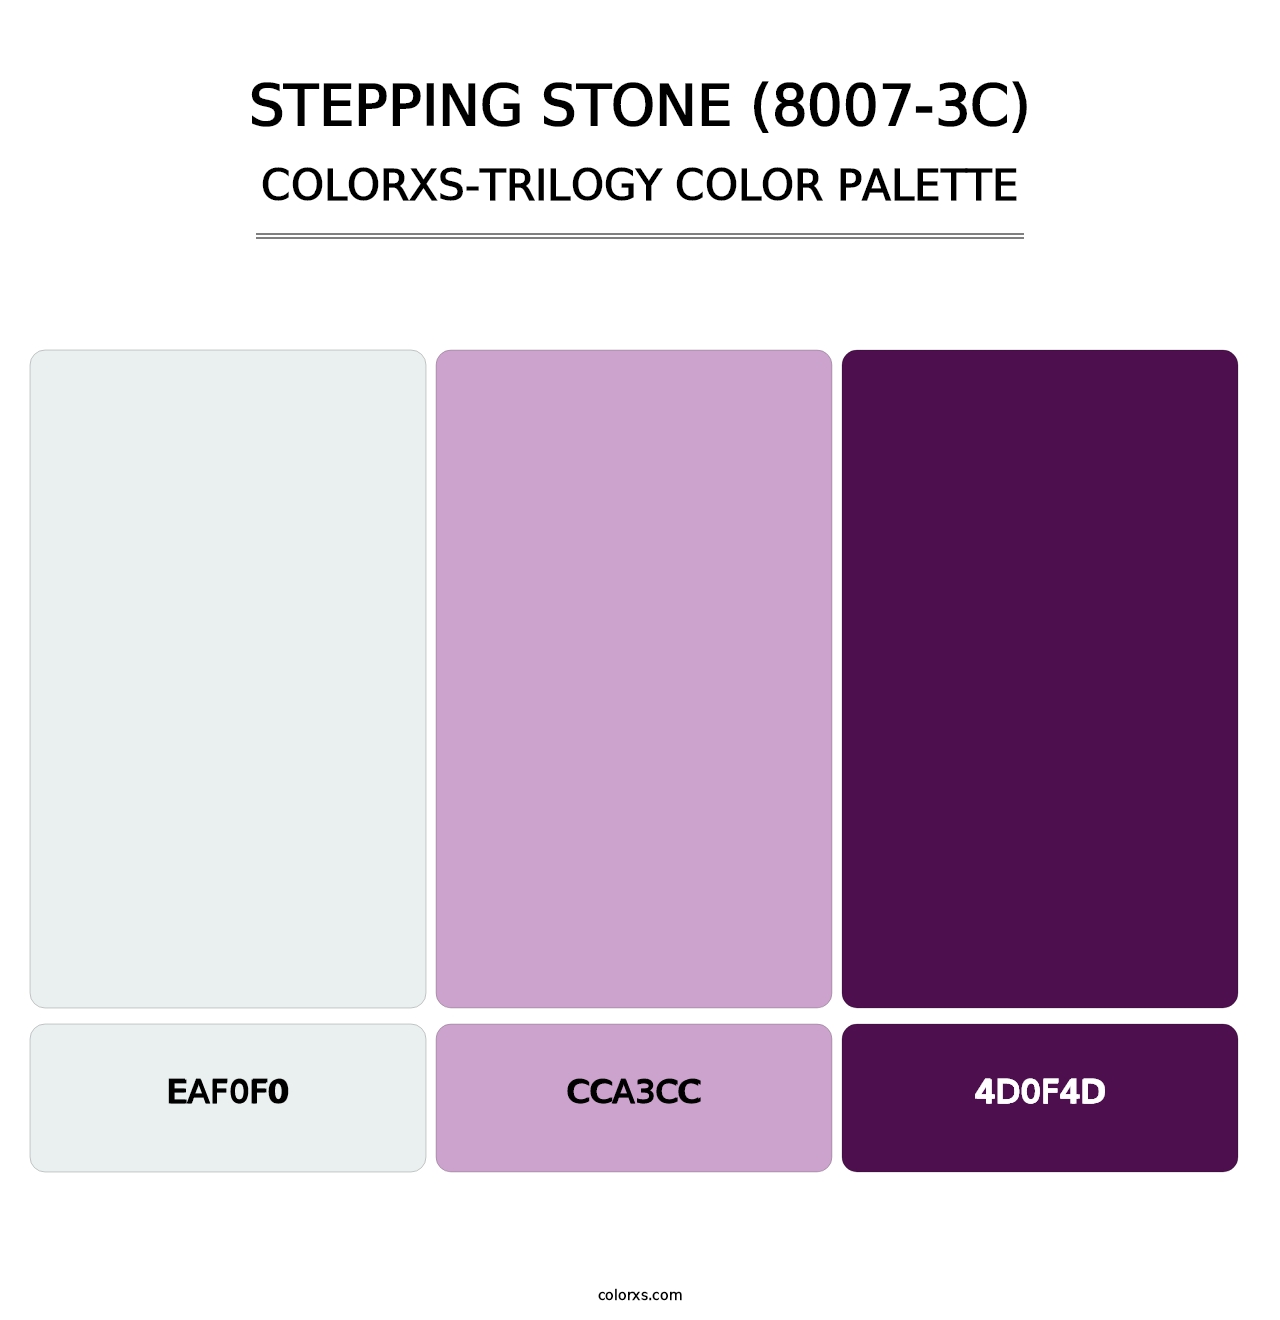 Stepping Stone (8007-3C) - Colorxs Trilogy Palette